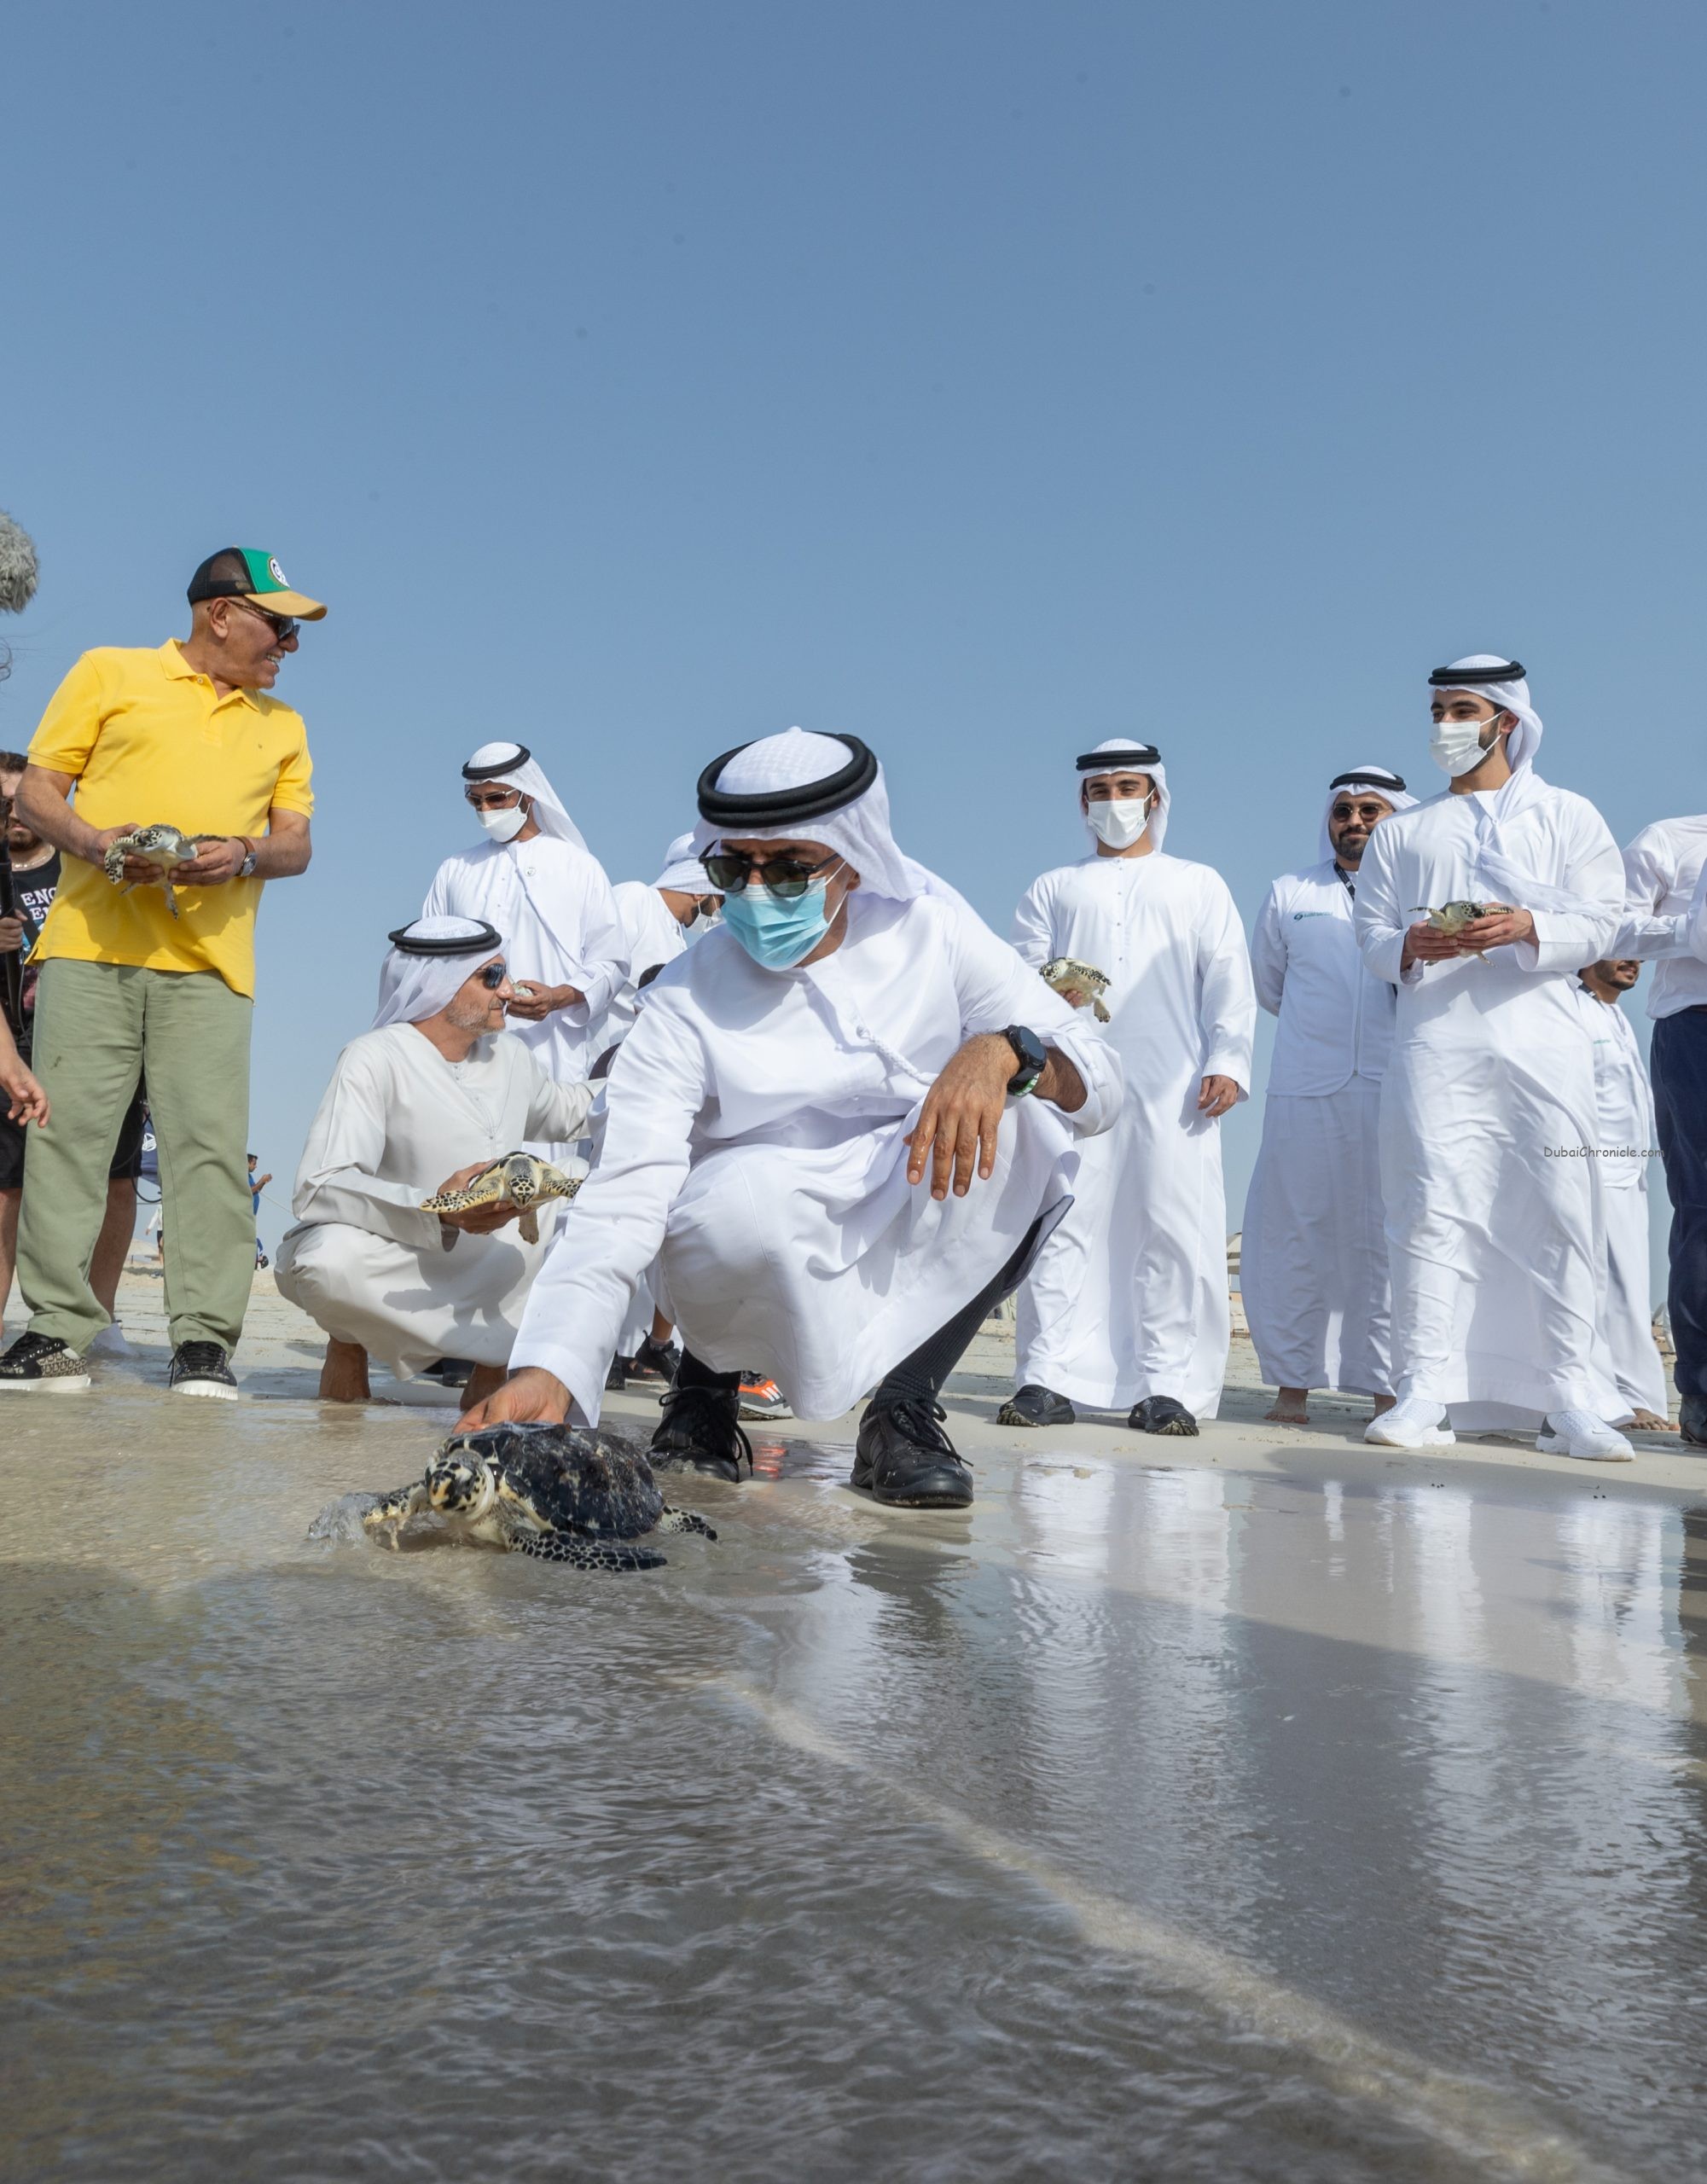 The Environment Agency and The National Aquarium Abu Dhabi (TNA) have safely returned 250 sea turtles back into open waters.